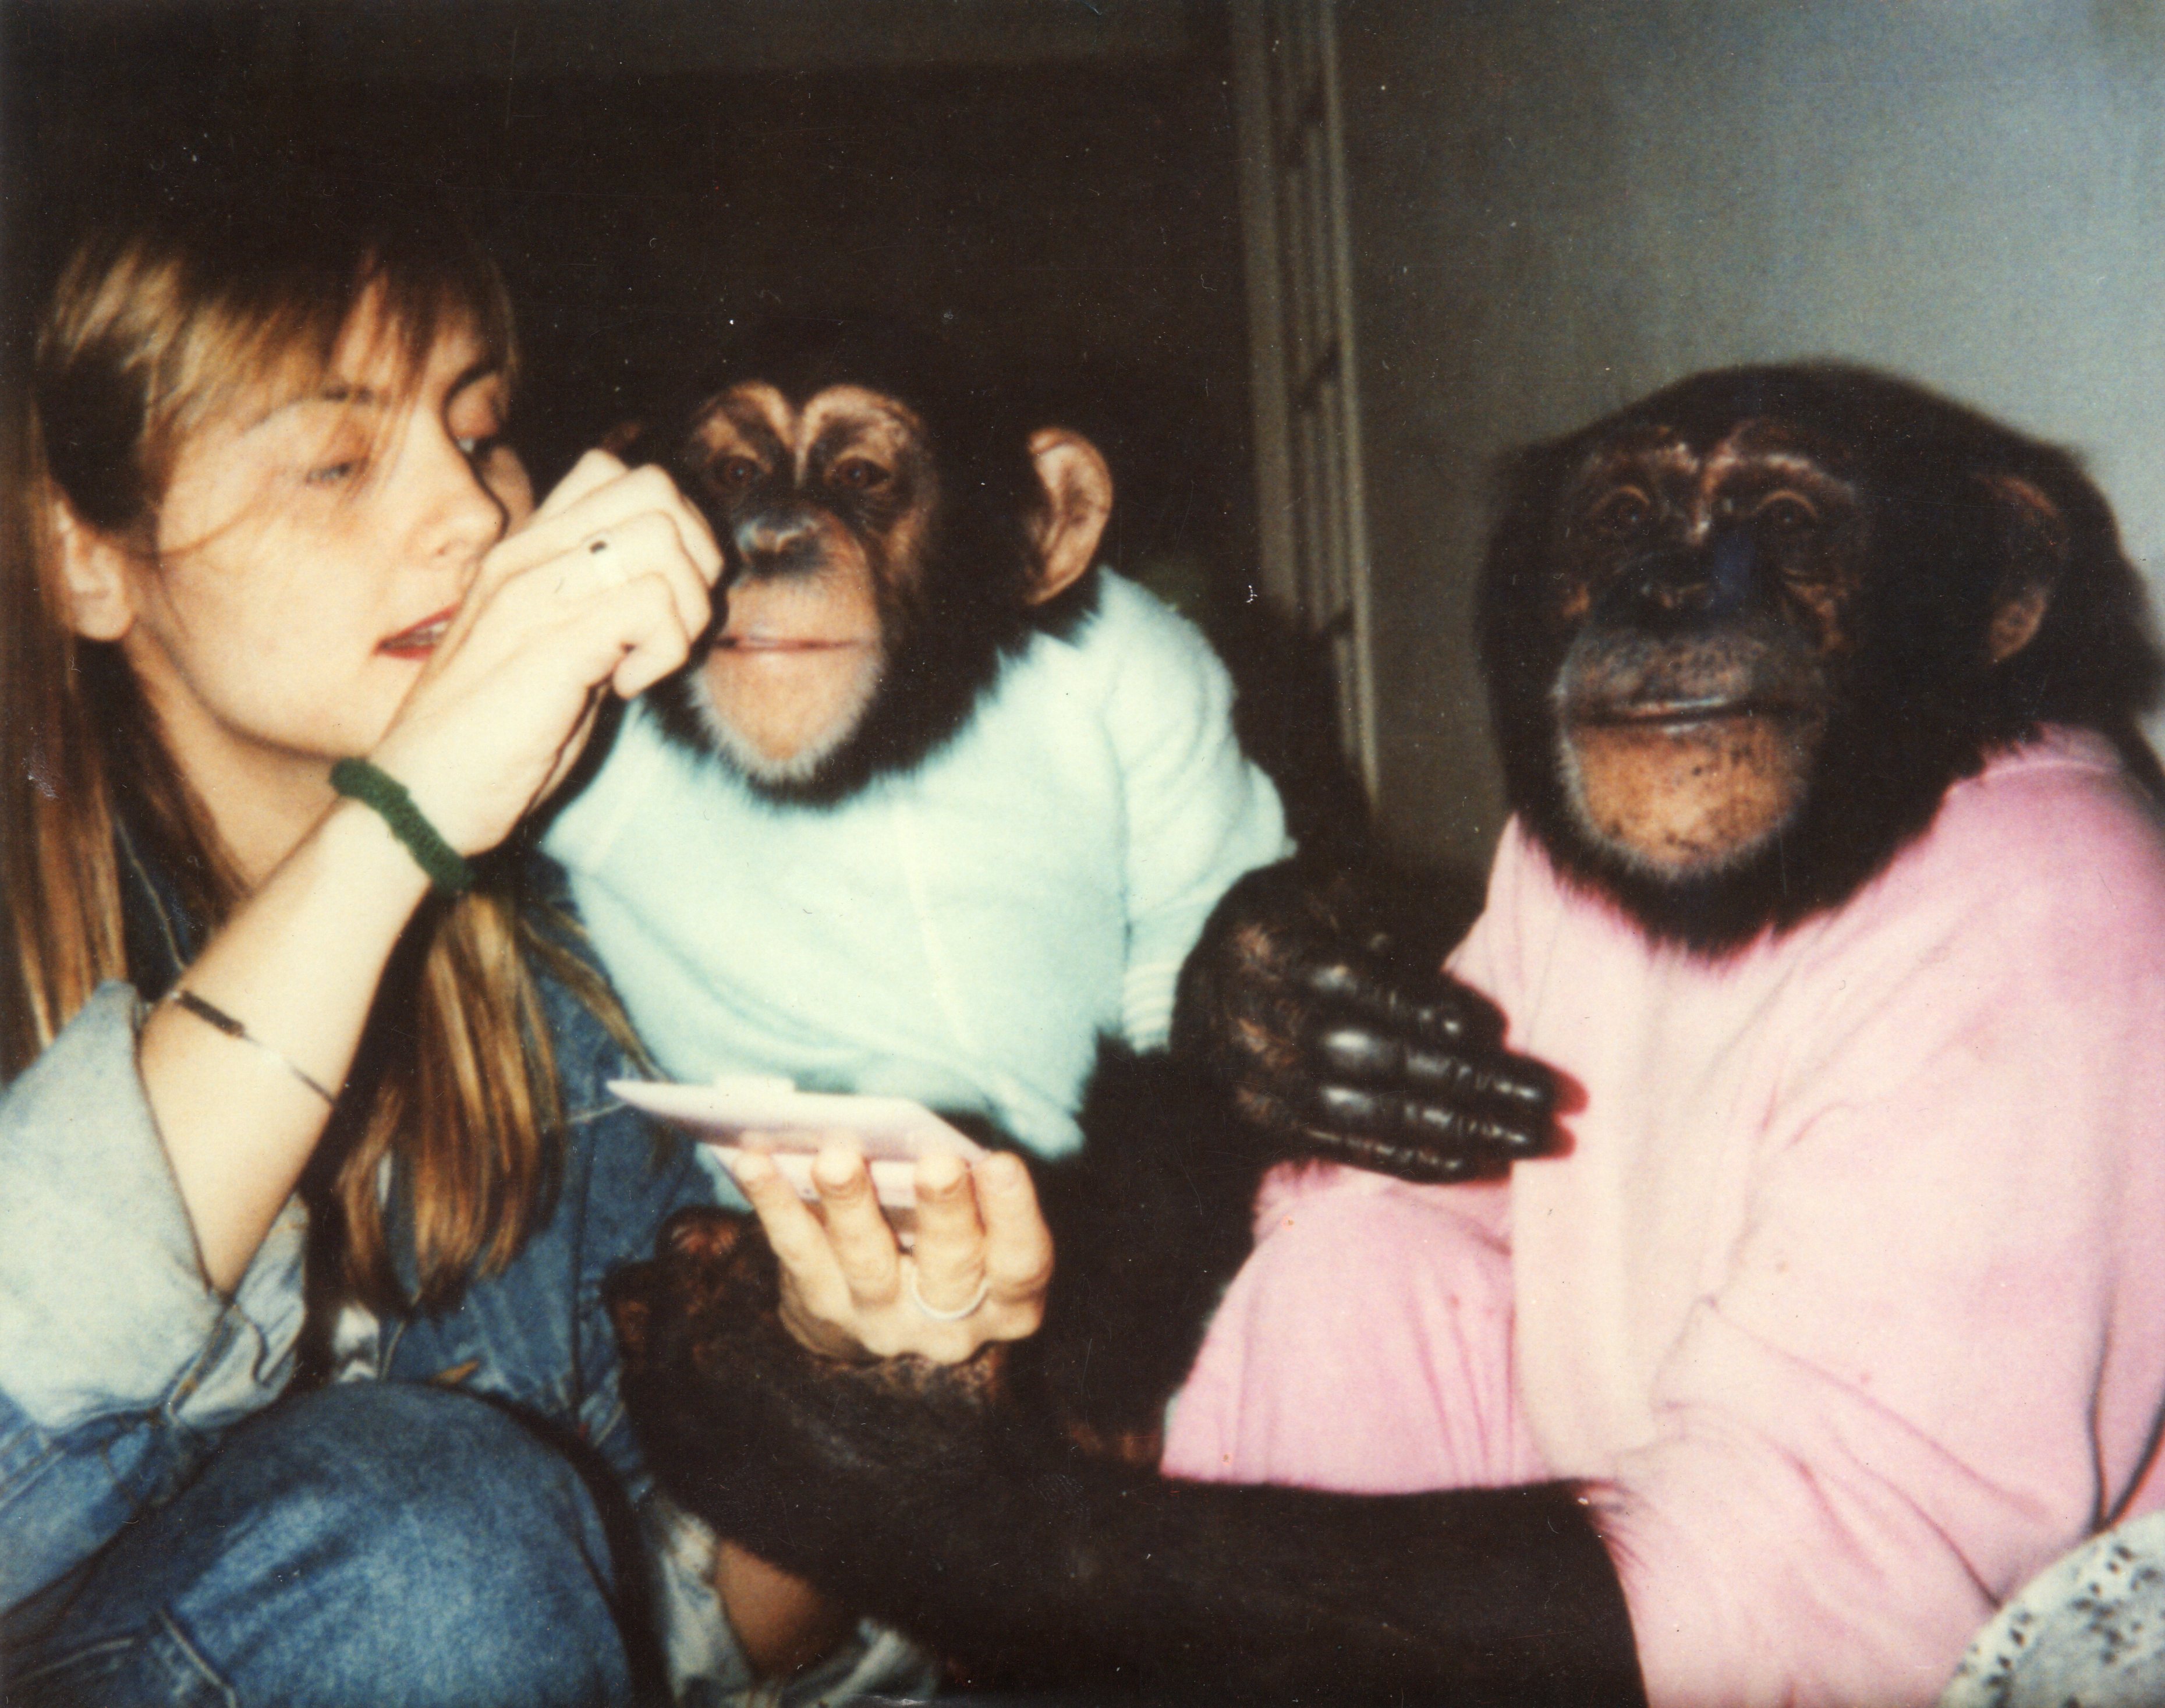 FLAVIA FONTES FILMING LIVING WITH CHIMPANZEES